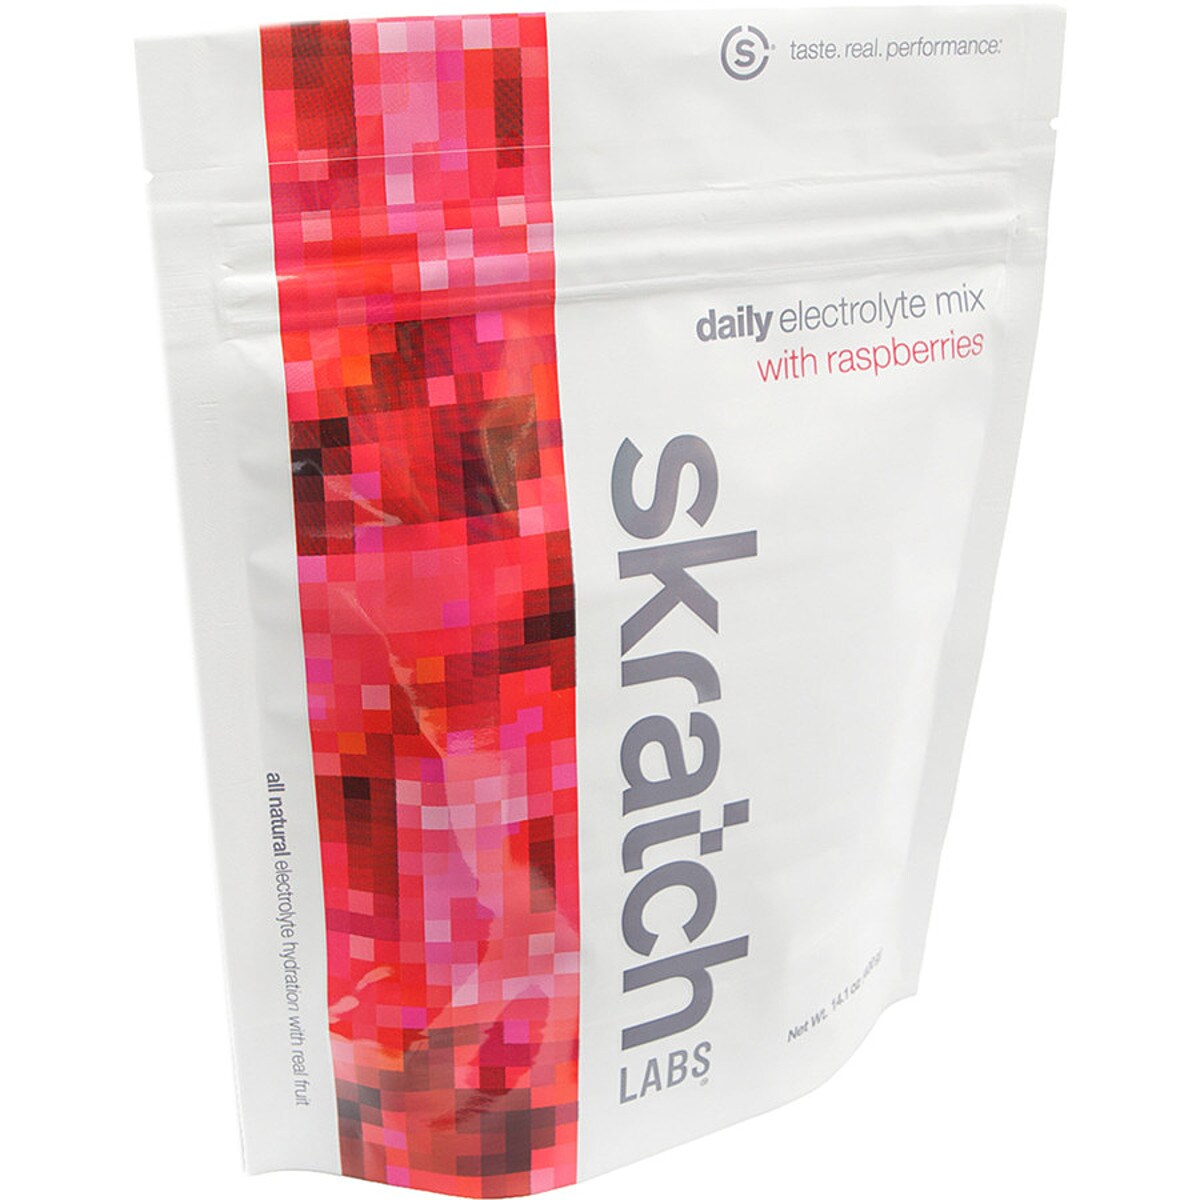 Skratch Labs Daily Electrolyte Drink Mix